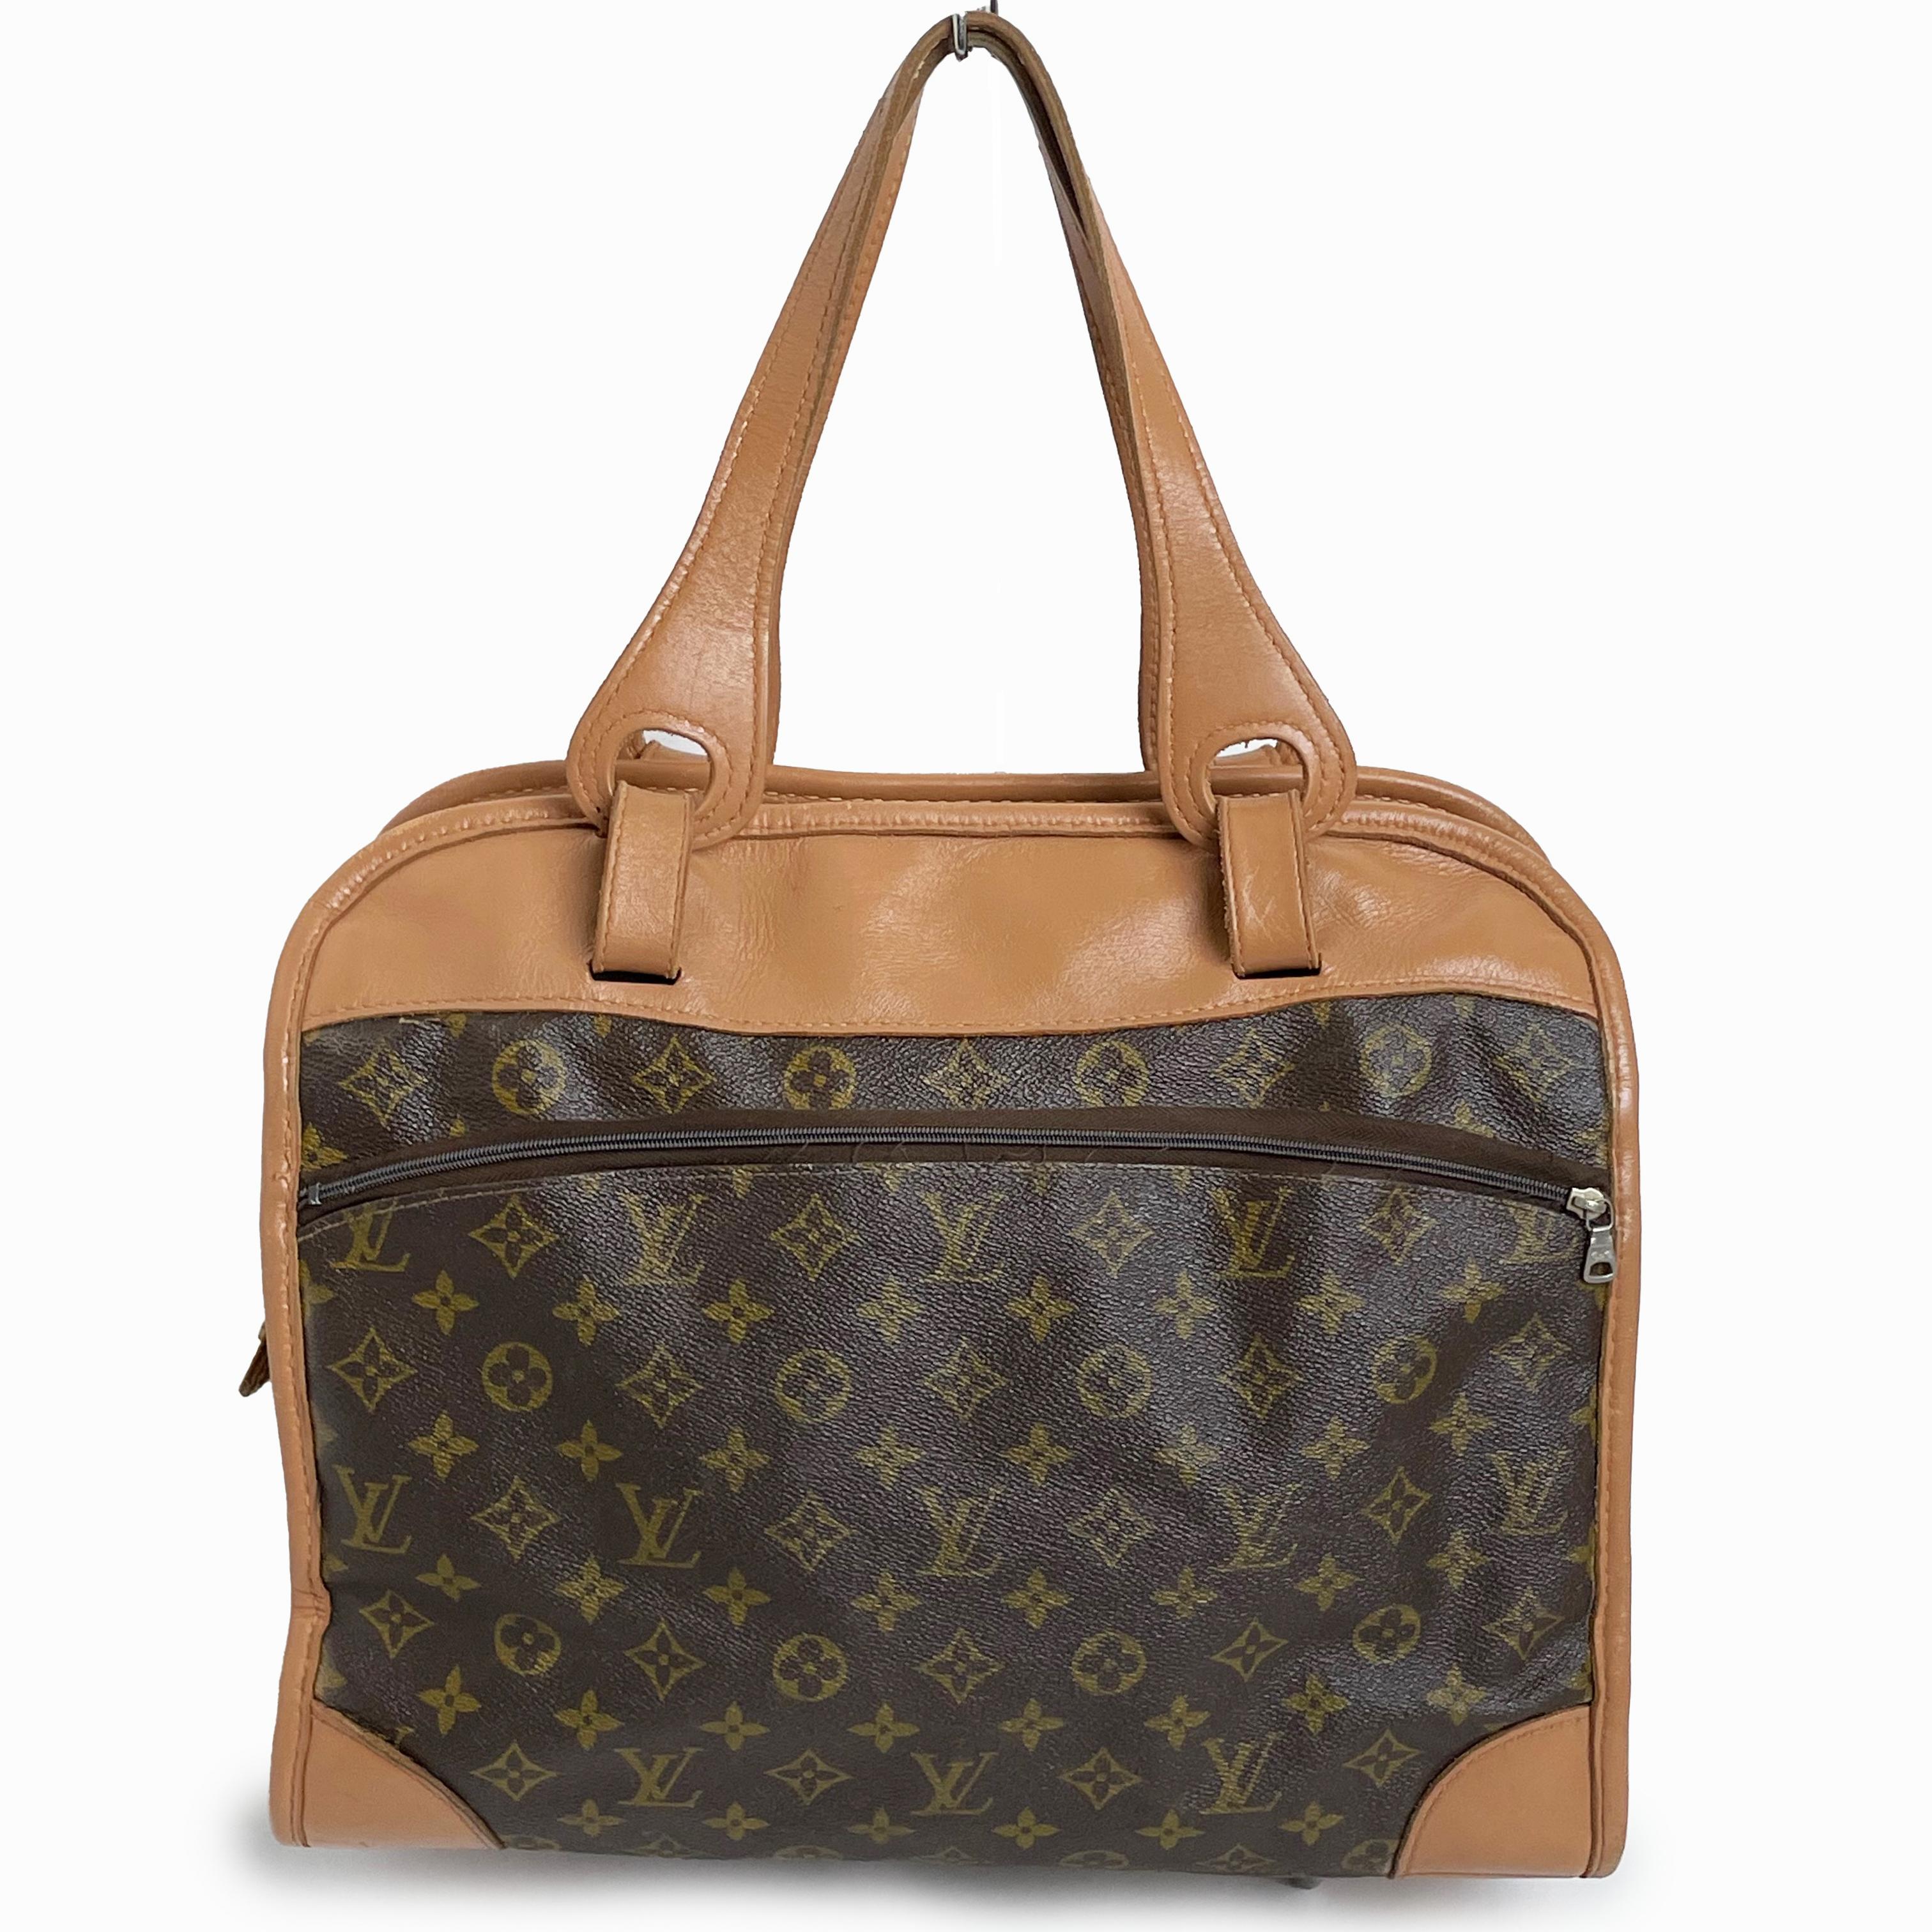 Louis Vuitton Tote Bag Travel Carry On French Luggage Co Saks 5th Ave Vintage  im Angebot 5